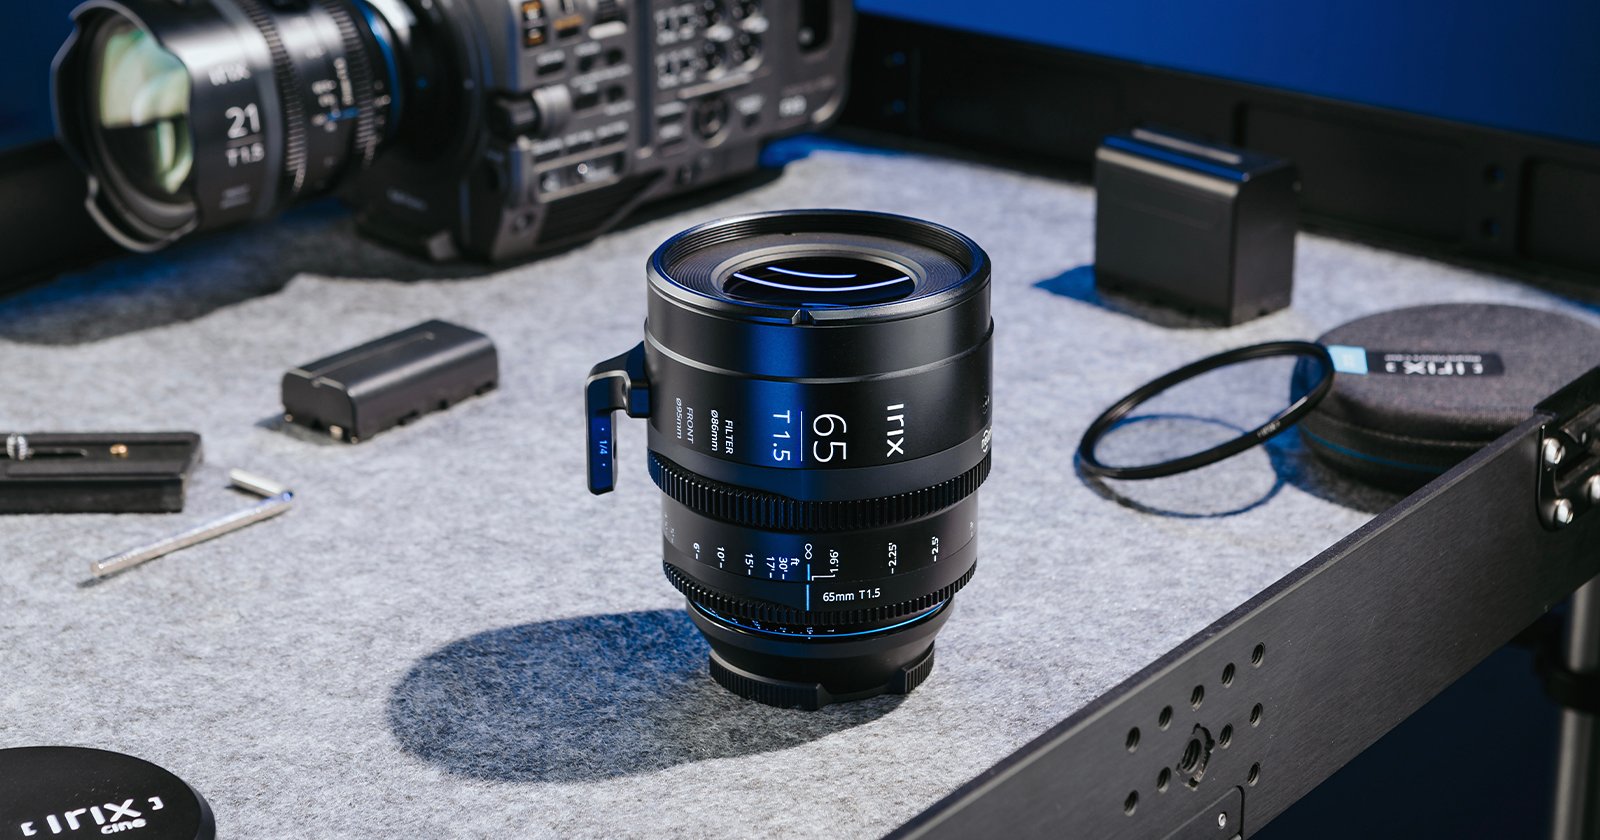 Irix Debuts a Cine 65mm T1.5 for a Bunch of Mirrorless Cameras